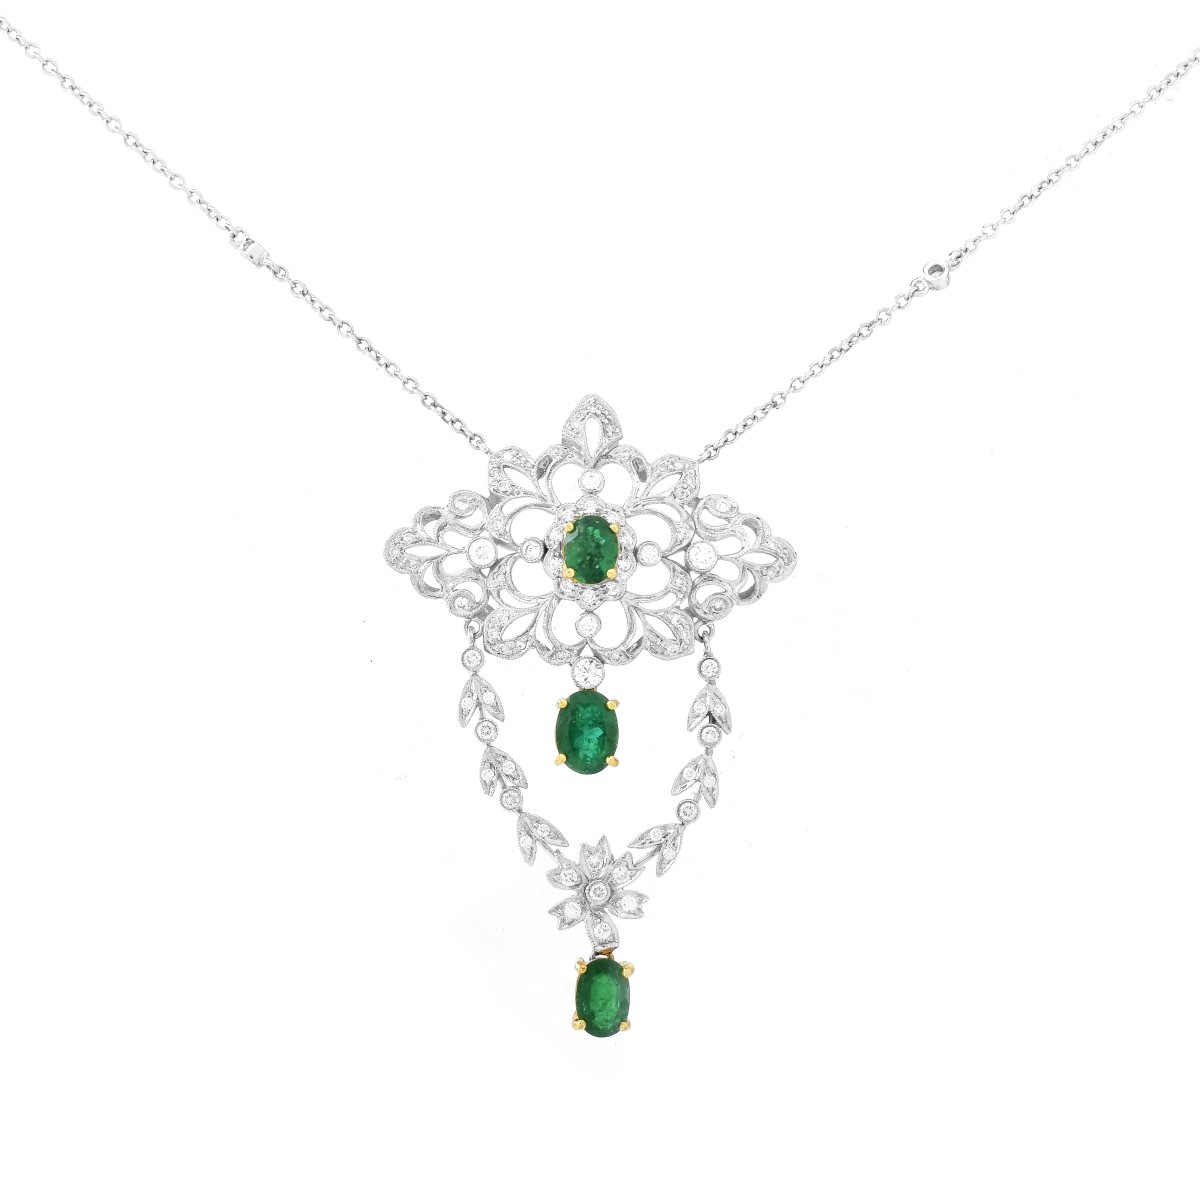 Emerald, Diamond and 18K Gold Necklace